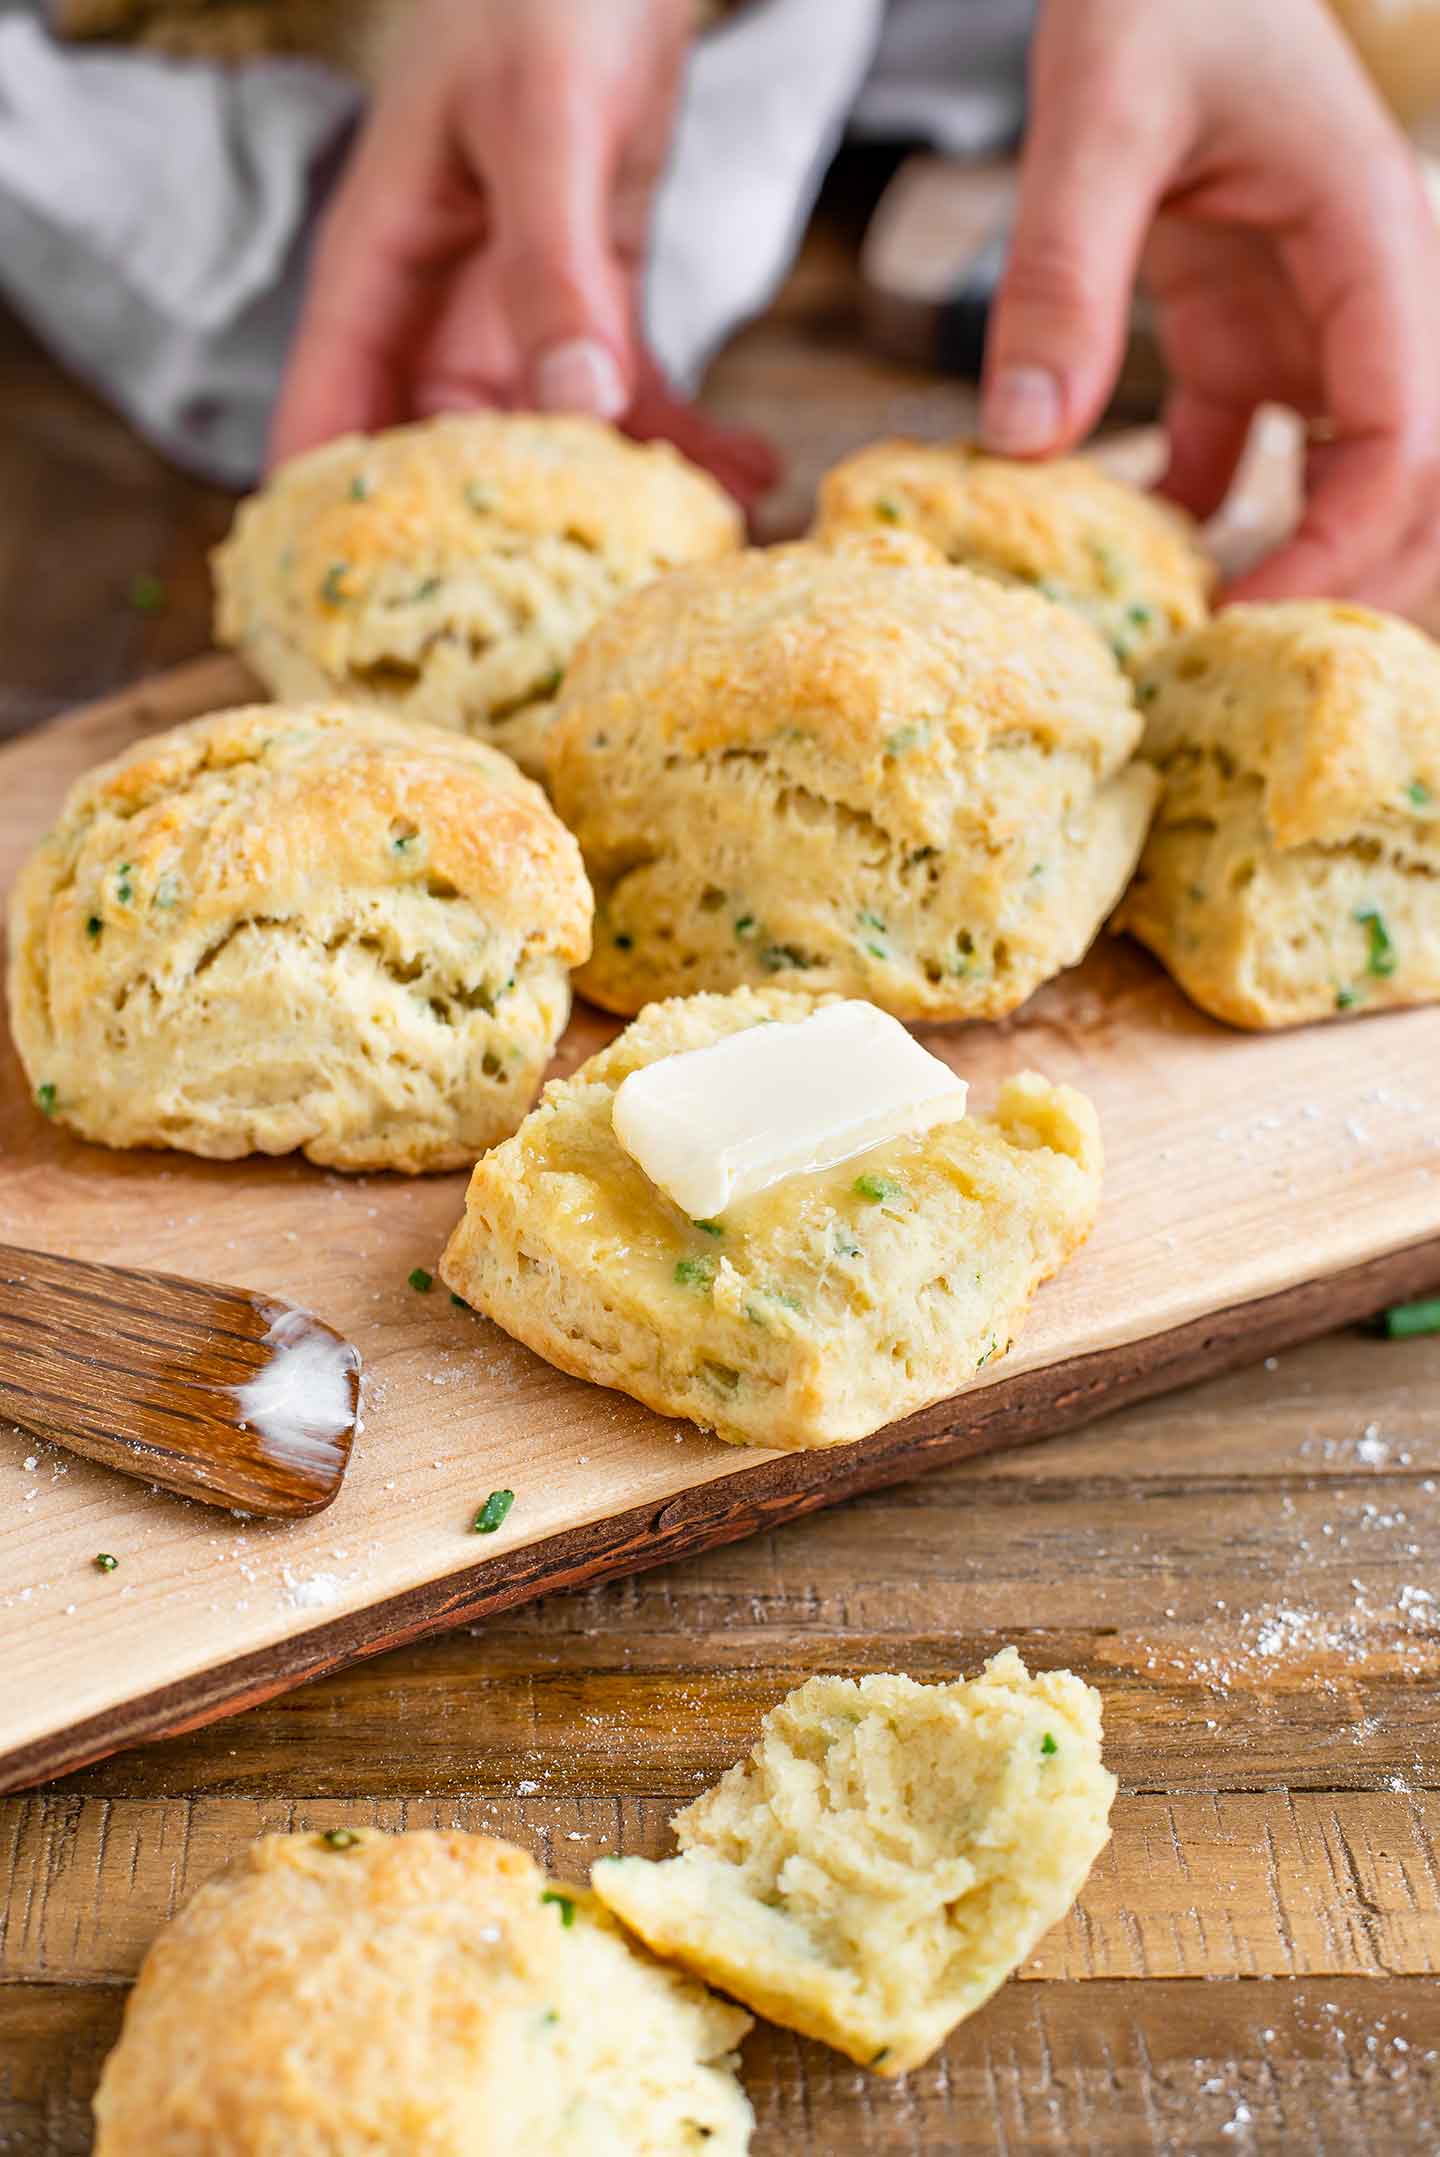 The bottom half of a garlic and chive flaky biscuit has a pat of butter melting into the warm biscuit.